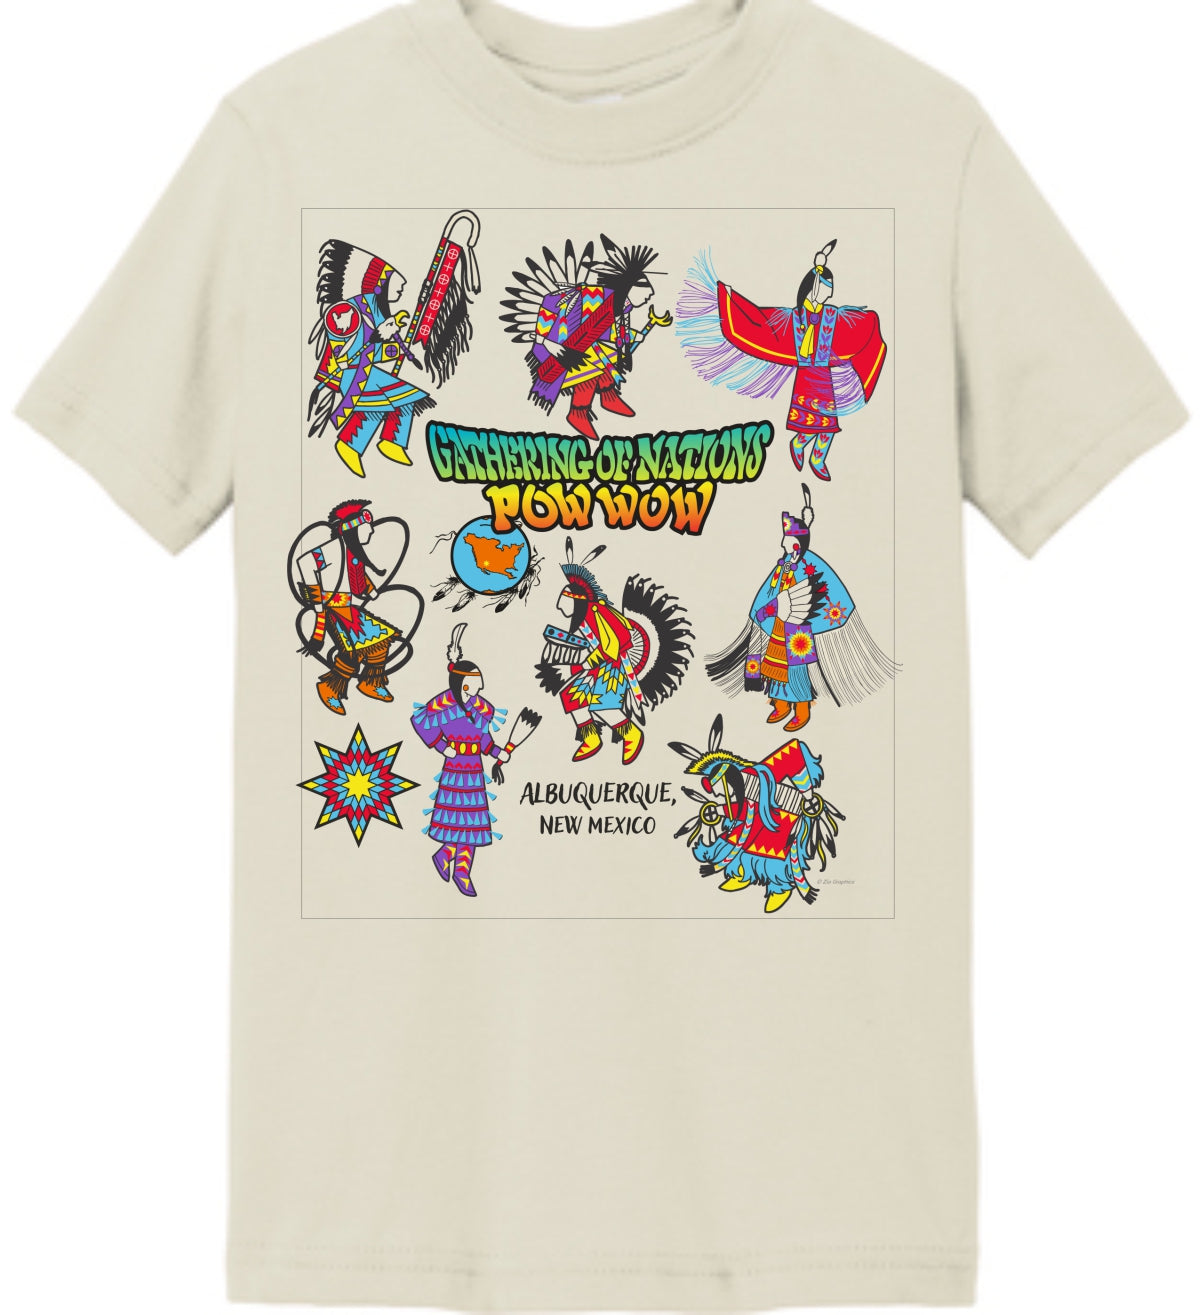 Youth Cartoon Dancers Tee (2T -Youth Large)